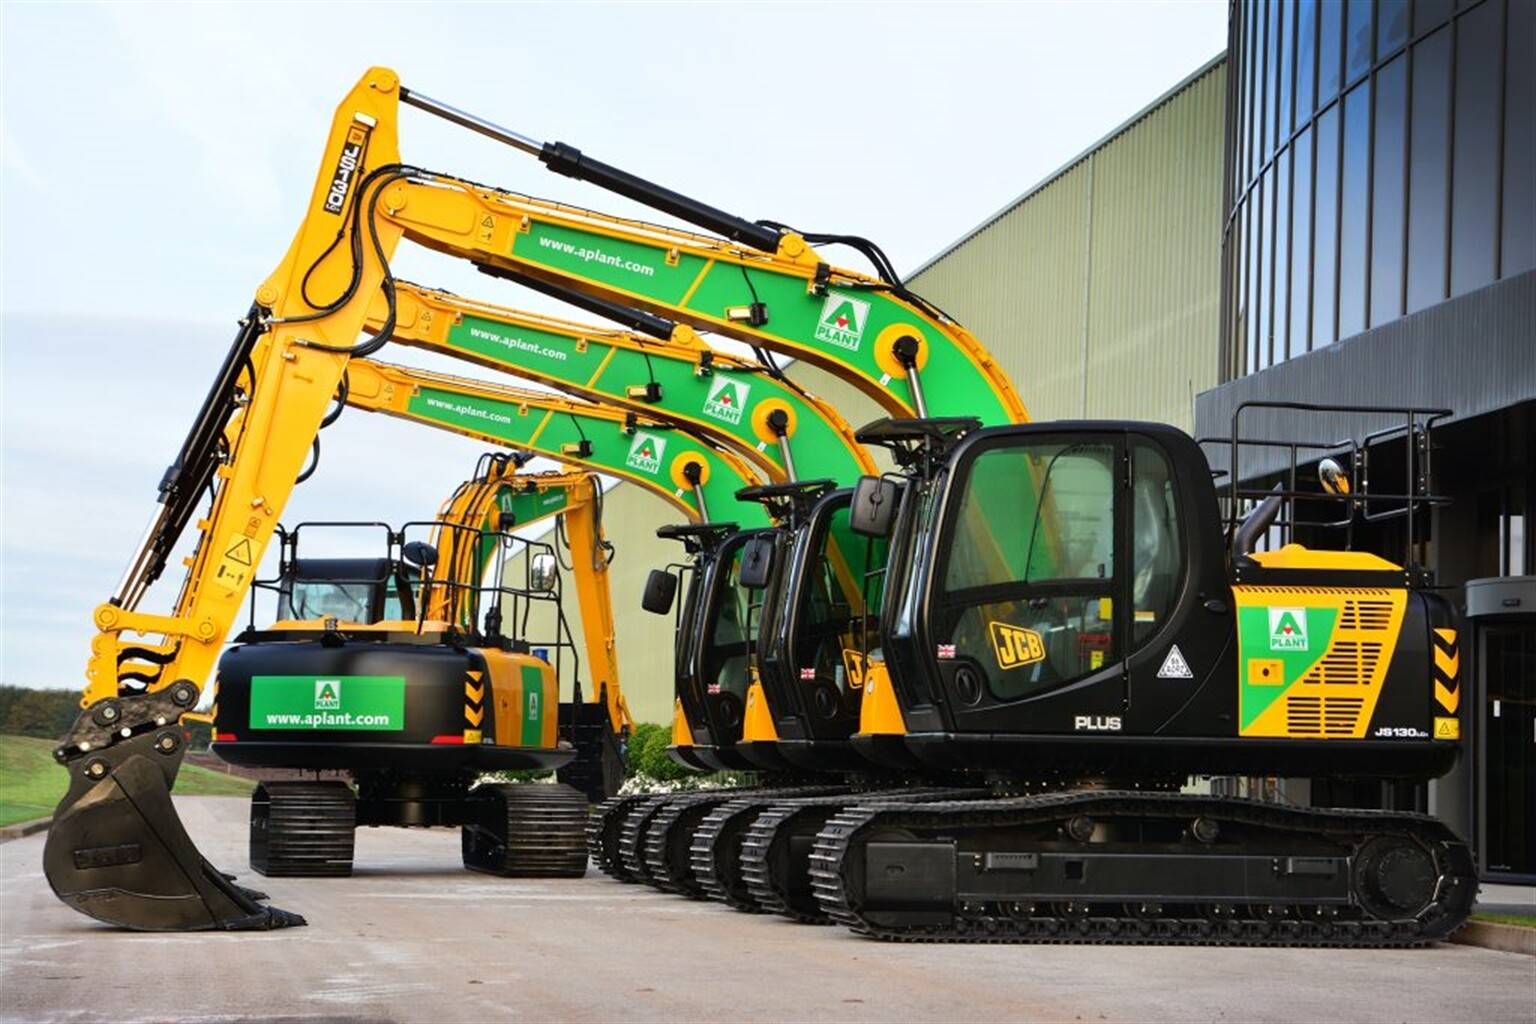 JCB lands big deal as A-Plant orders 1,200 machines